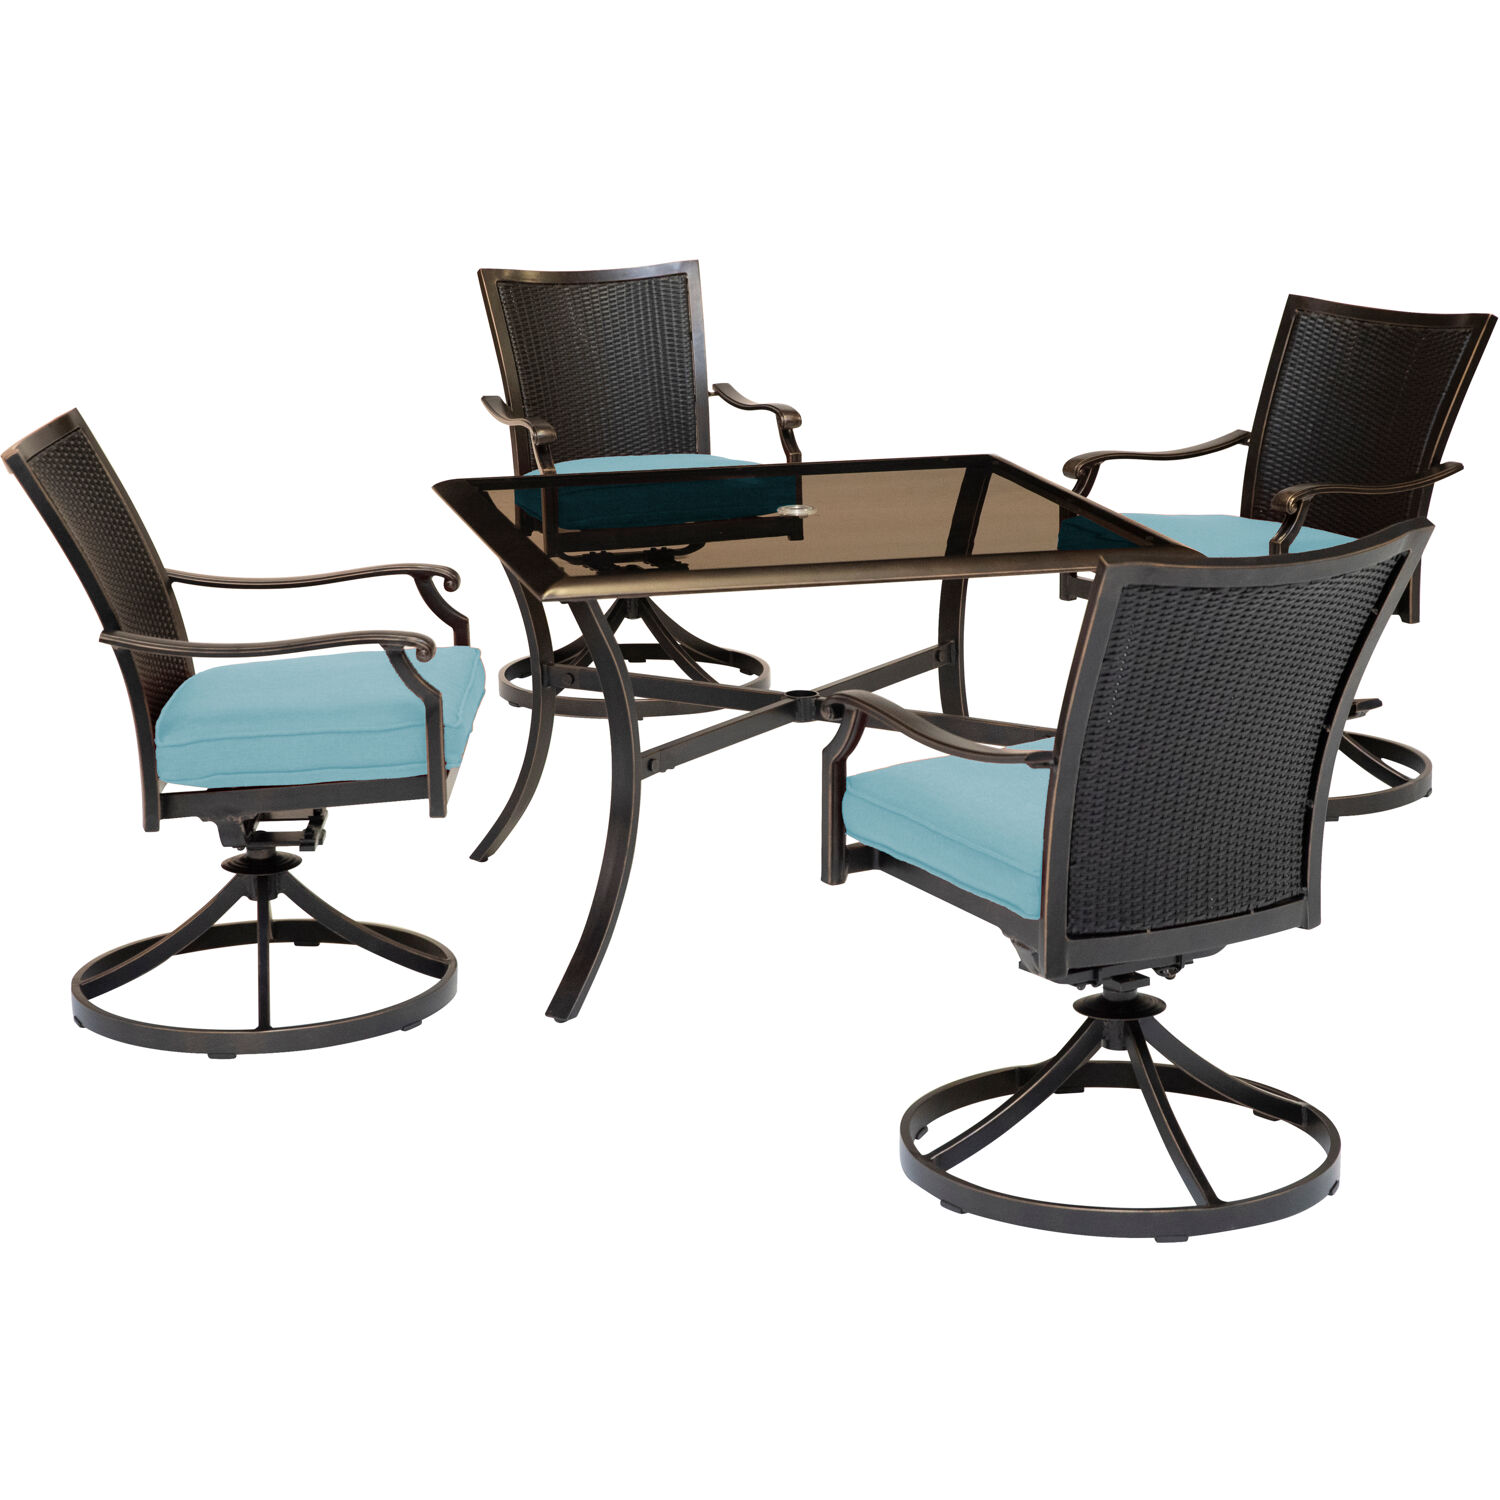 Hanover Traditions 5-Piece Outdoor Dining Set in Blue, 4 Wicker Back Swivel Rockers & 42 in Table - image 1 of 9